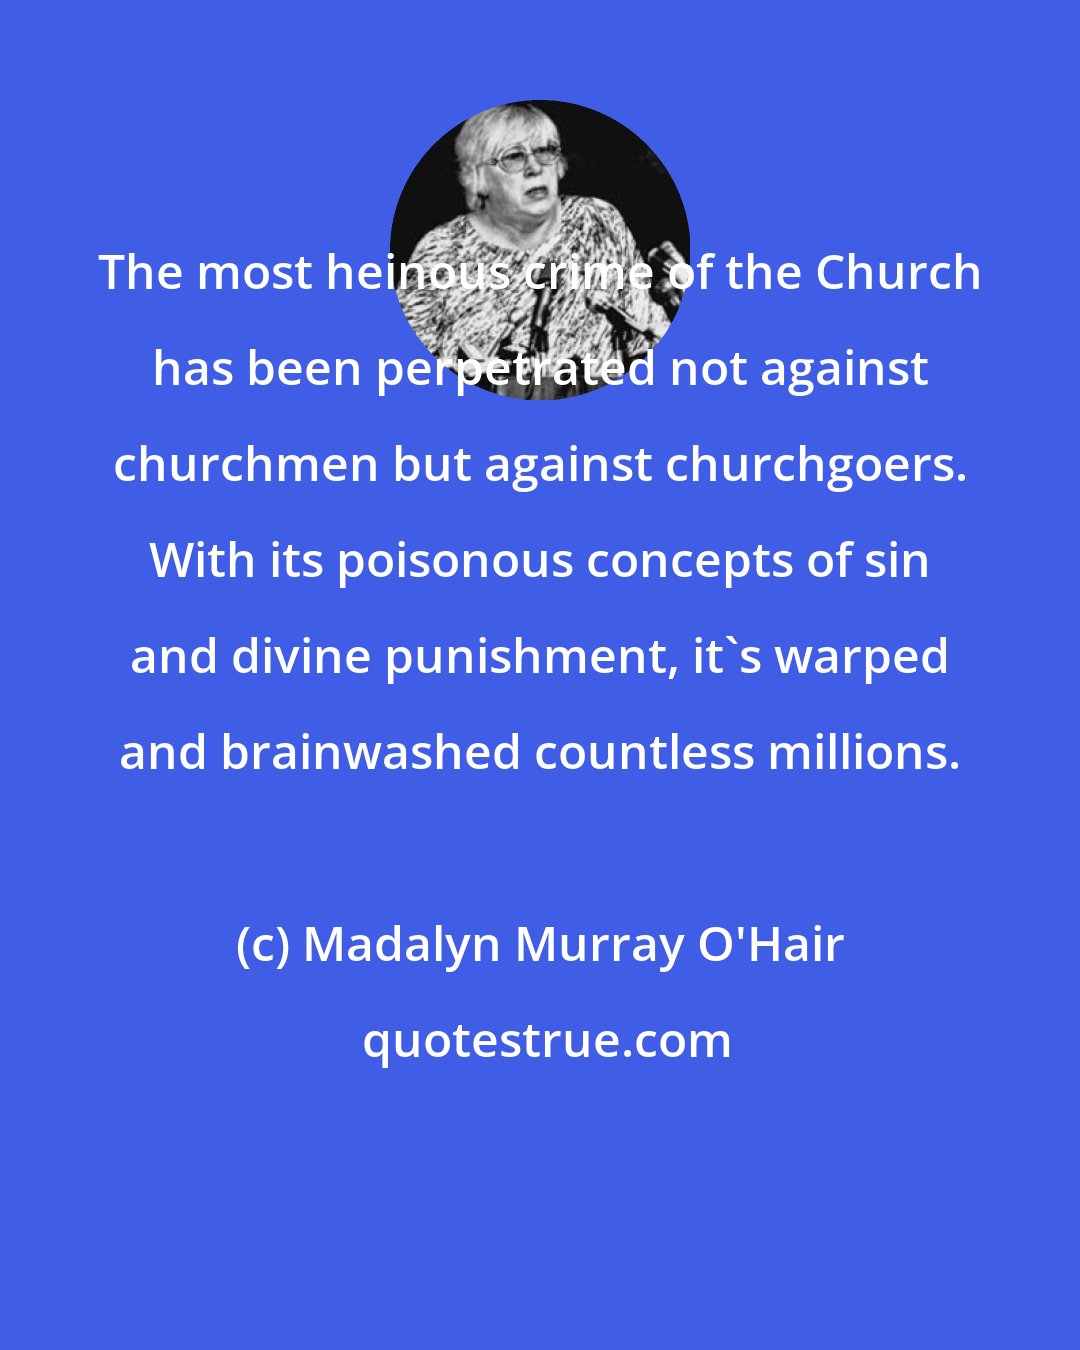 Madalyn Murray O'Hair: The most heinous crime of the Church has been perpetrated not against churchmen but against churchgoers. With its poisonous concepts of sin and divine punishment, it's warped and brainwashed countless millions.